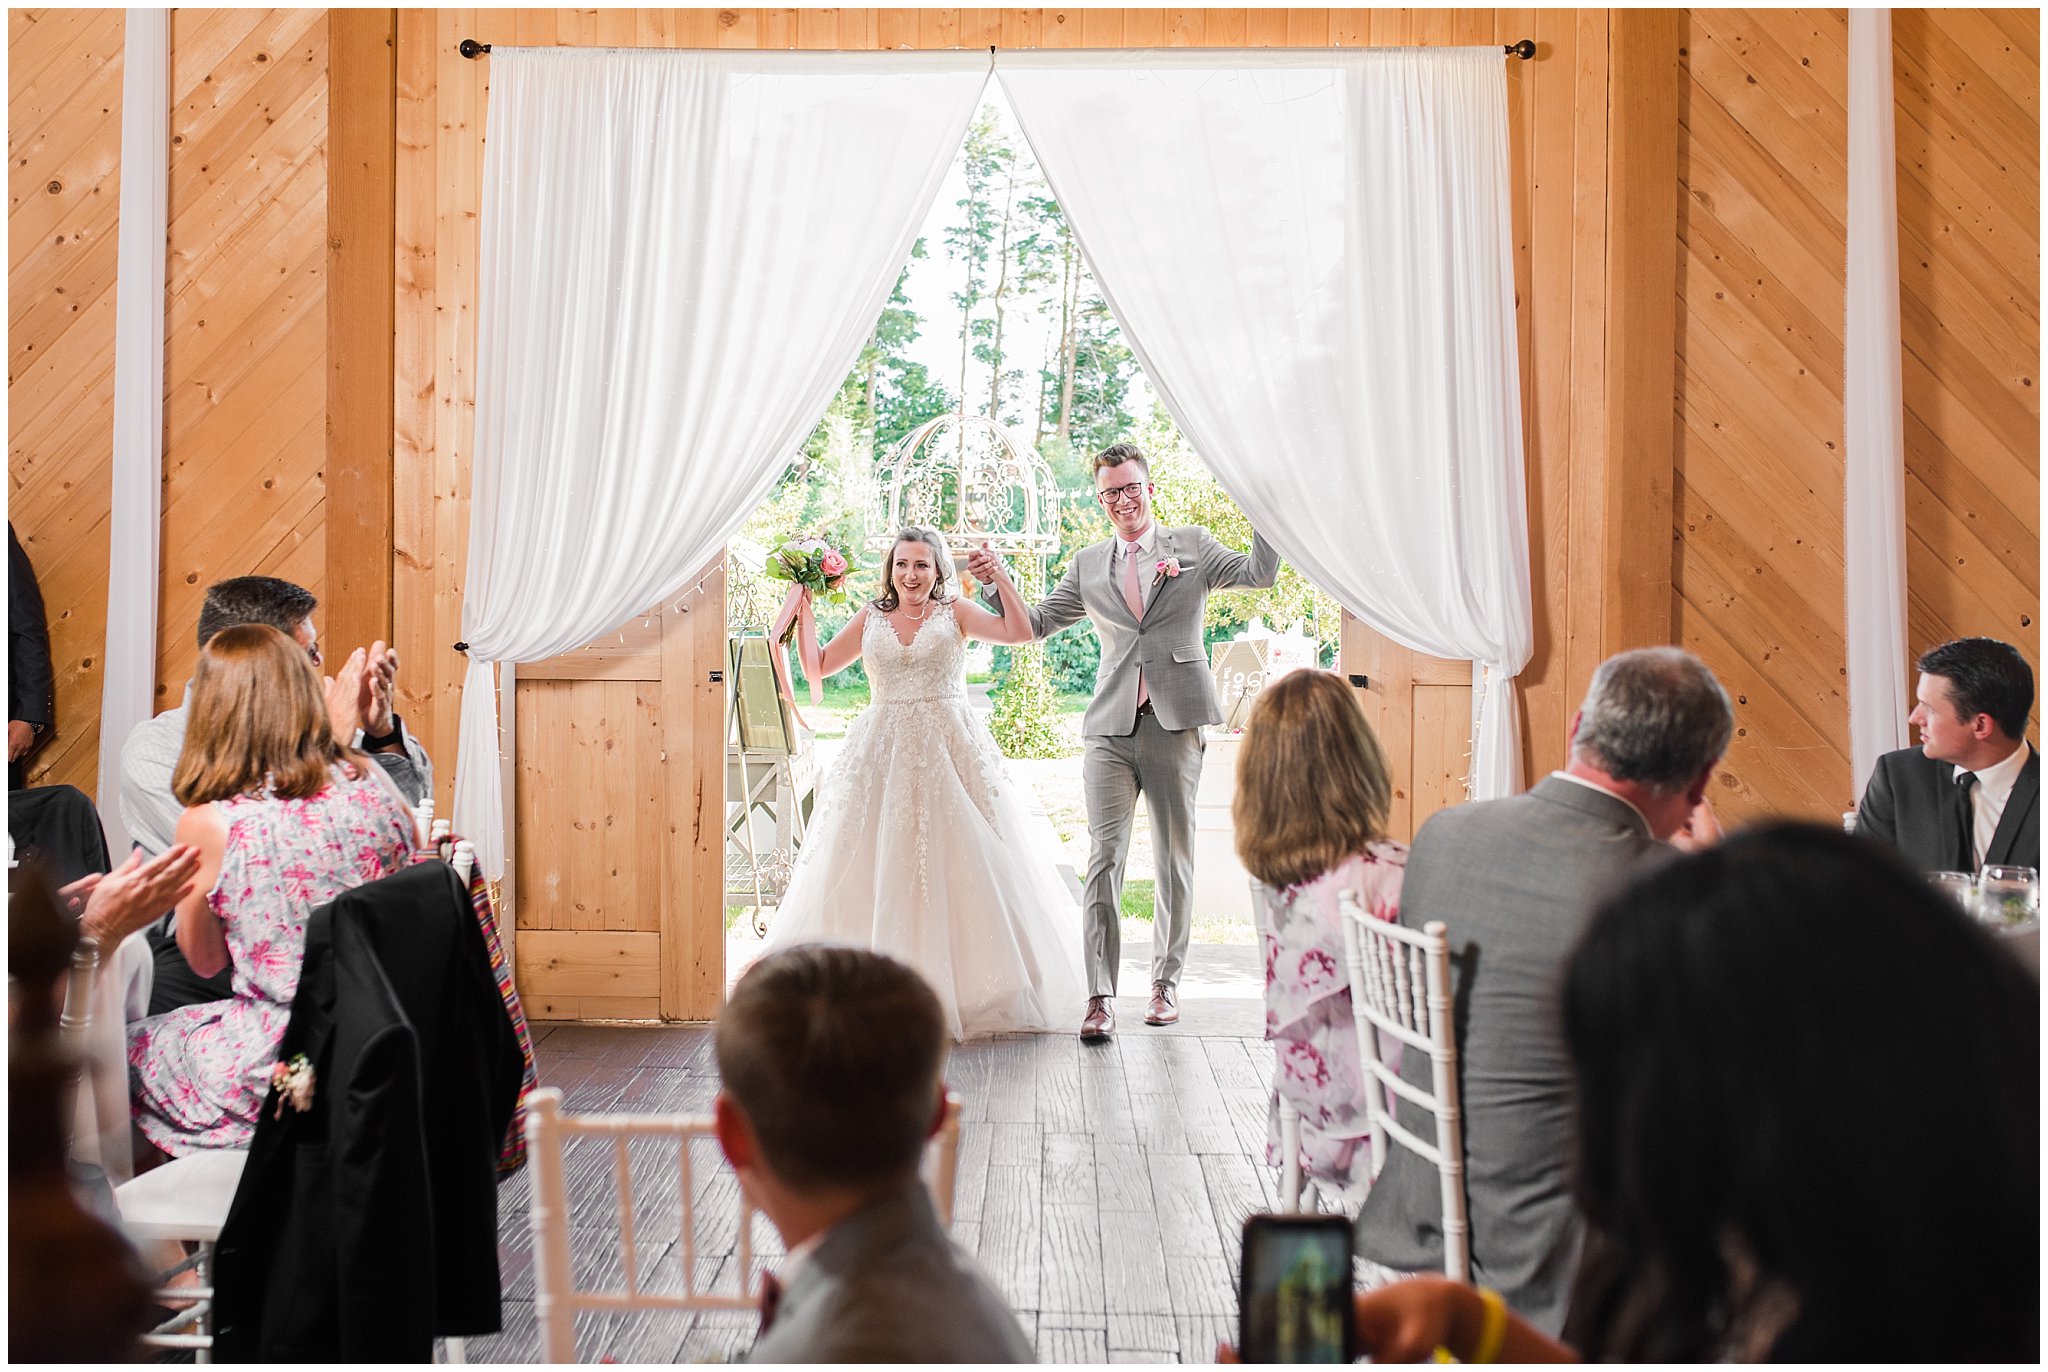 Bride and groom grand entrance in barn | Oak Hills Utah Dusty Rose and Gray Summer Wedding | Jessie and Dallin Photography